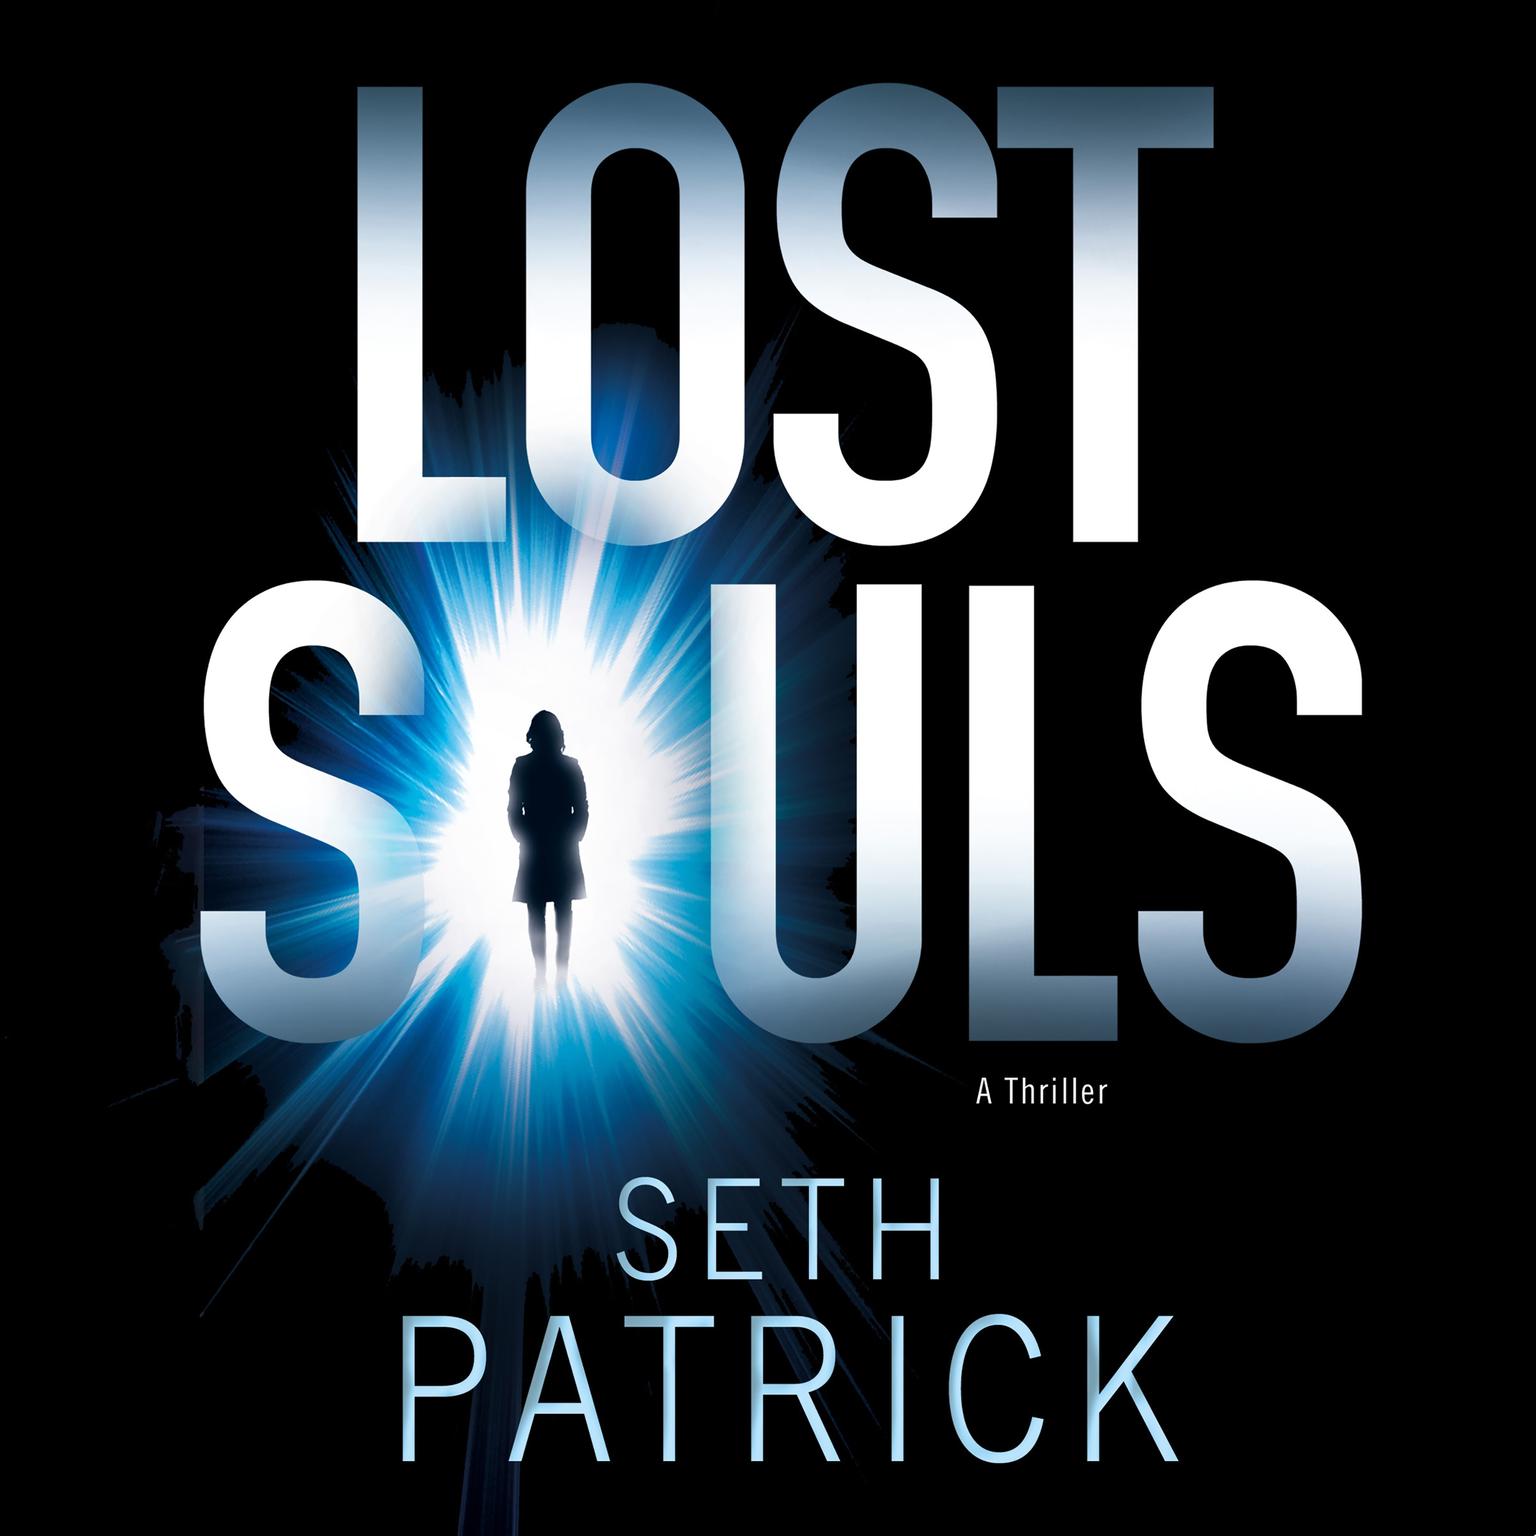 Lost Souls: A Thriller Audiobook, by Seth Patrick